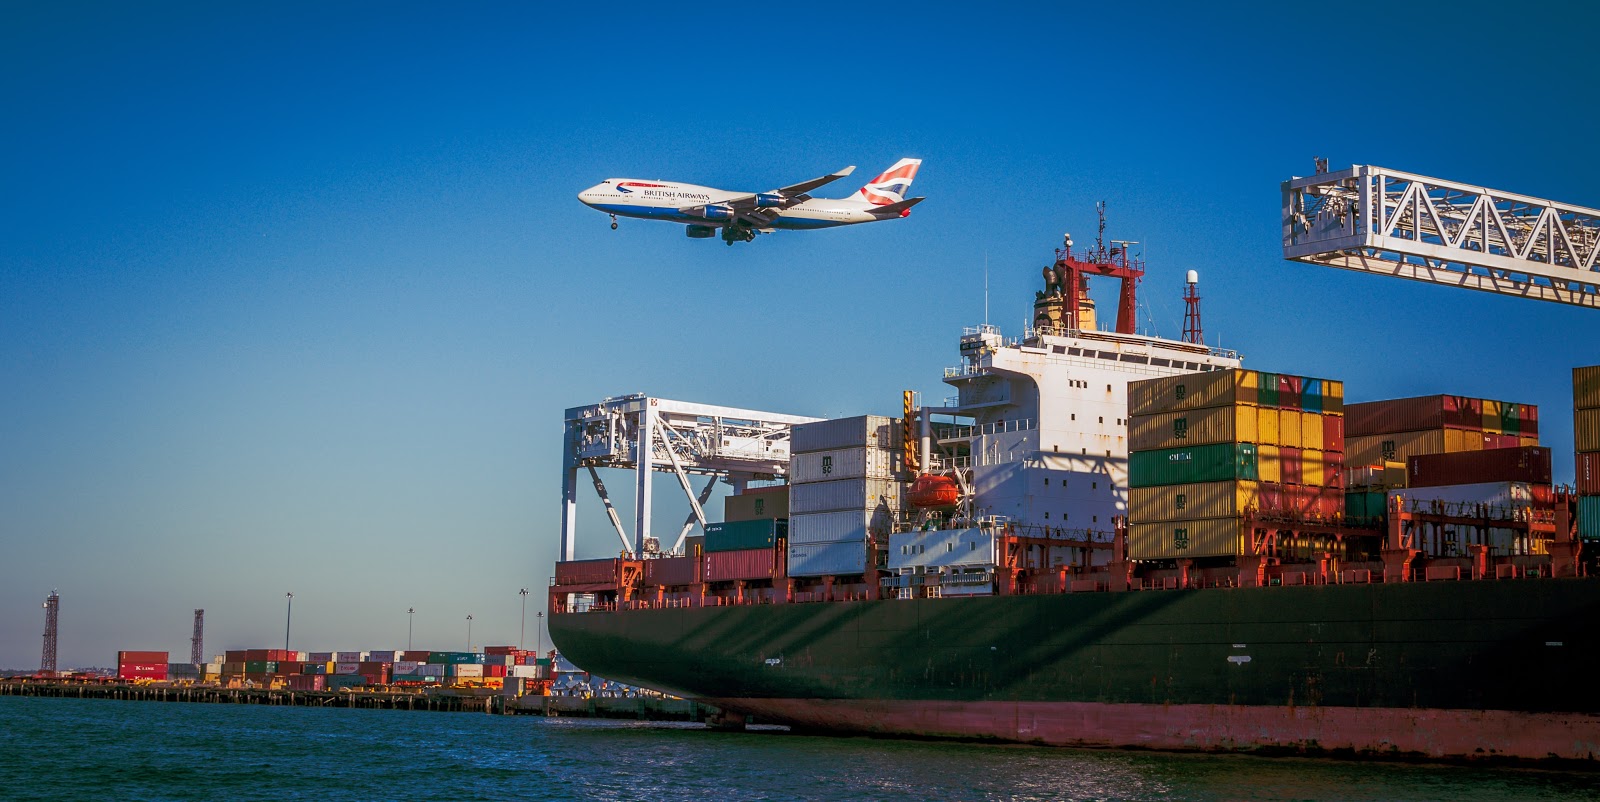 Plane arriving at airport shipping port